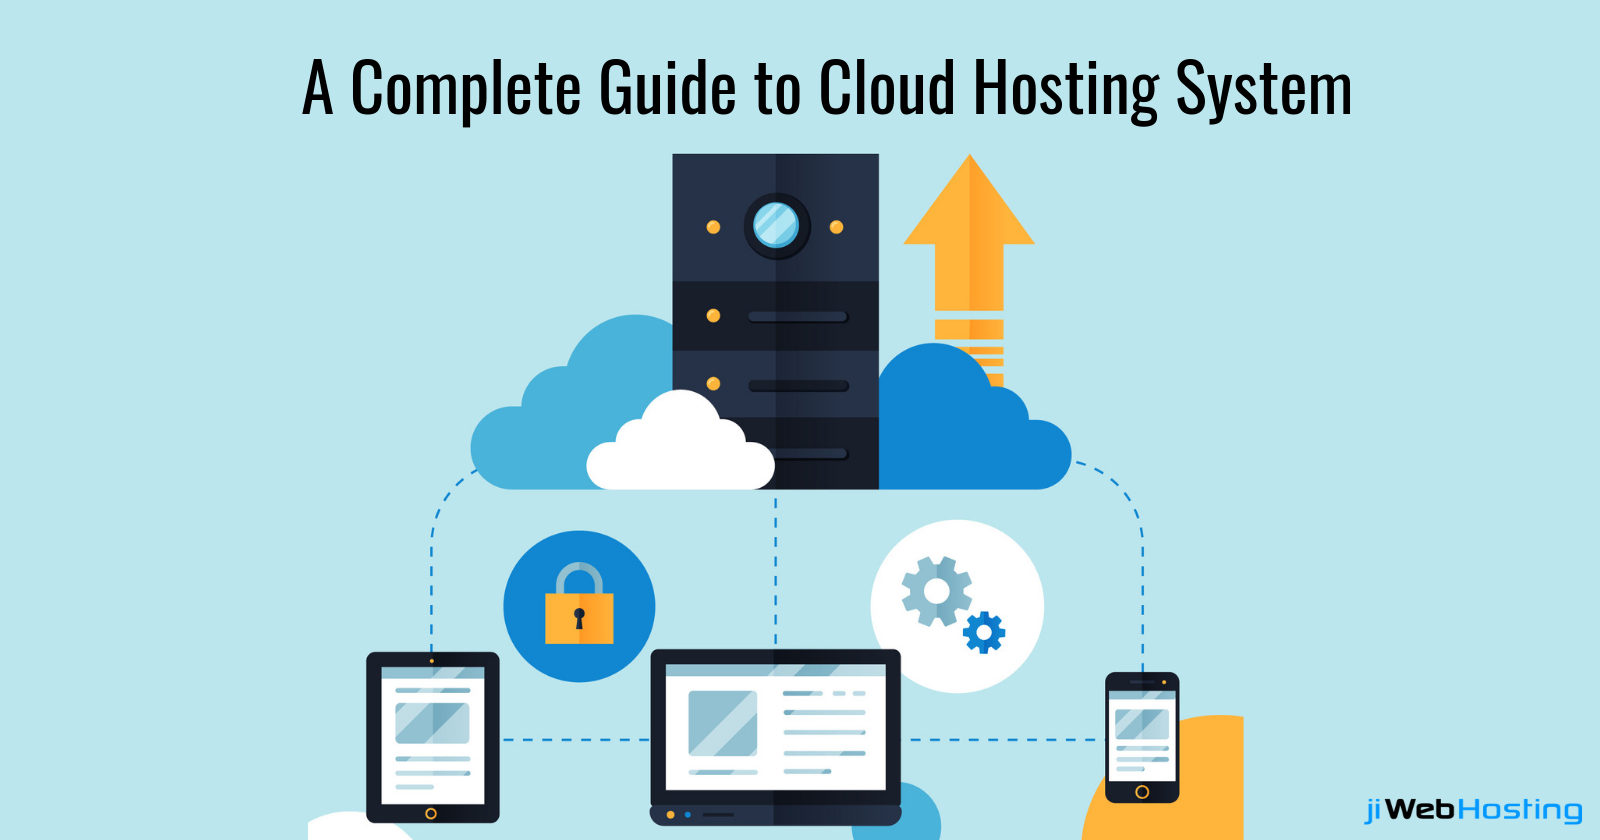 How Does Cloud Hosting Work?